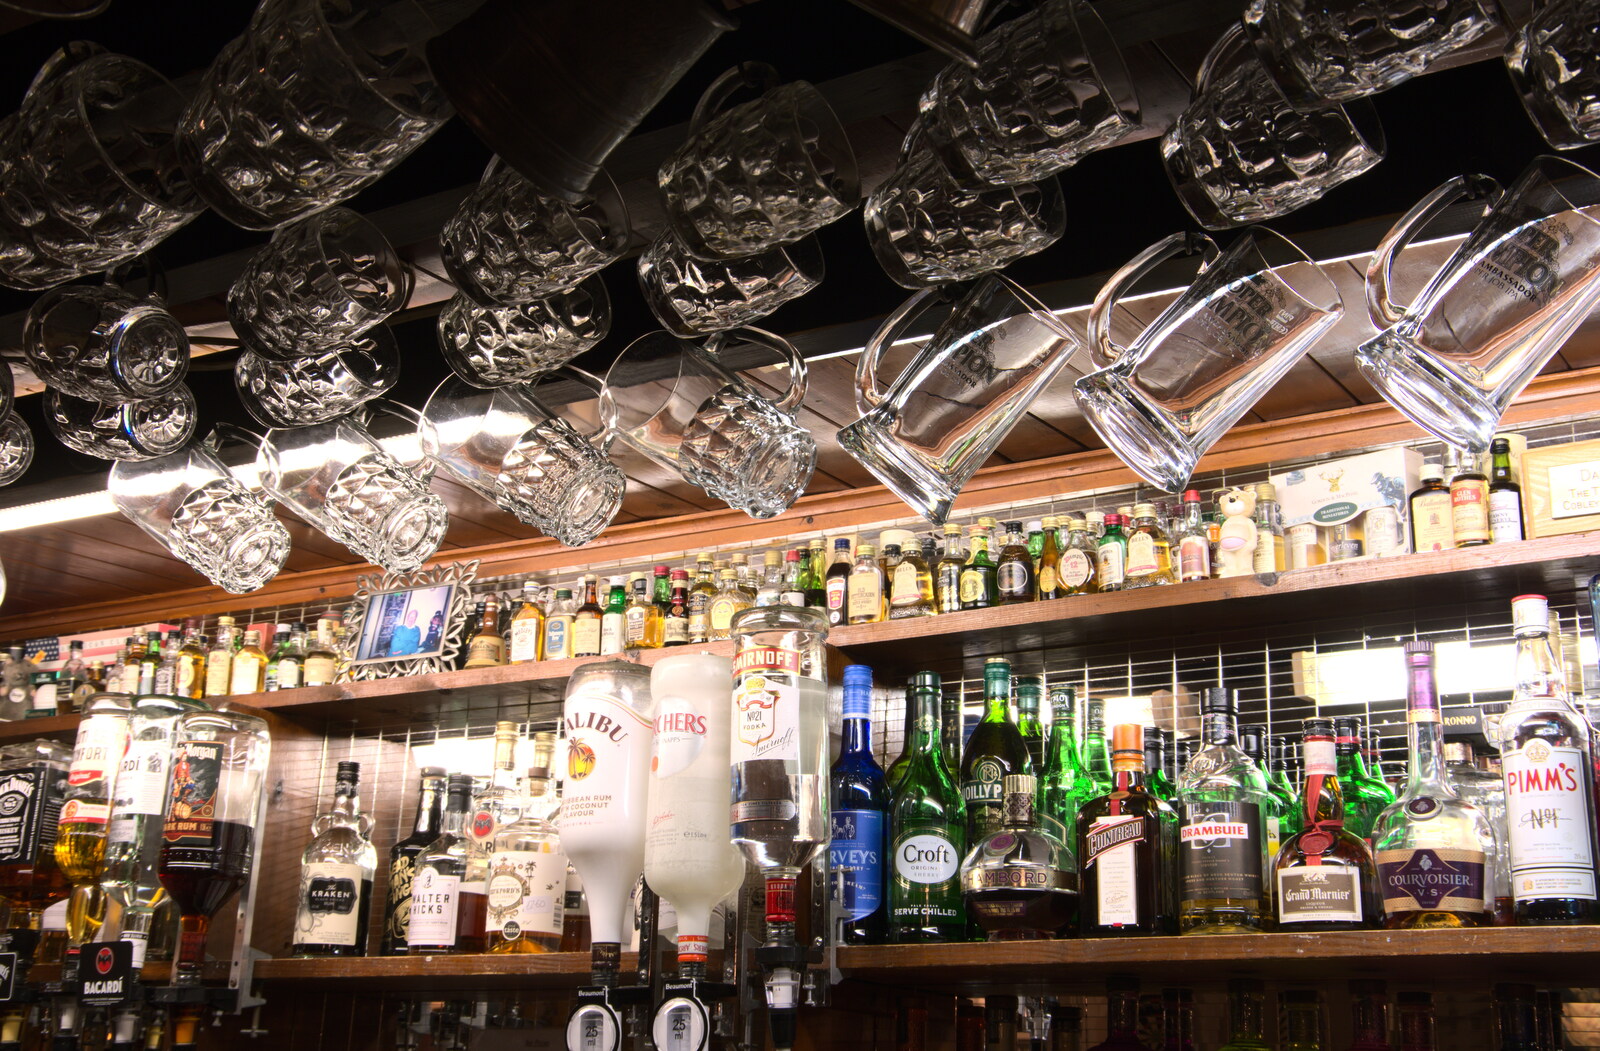 Glasses hang from the top of the bar from A Short Trip to Spreyton, Devon - 18th January 2020